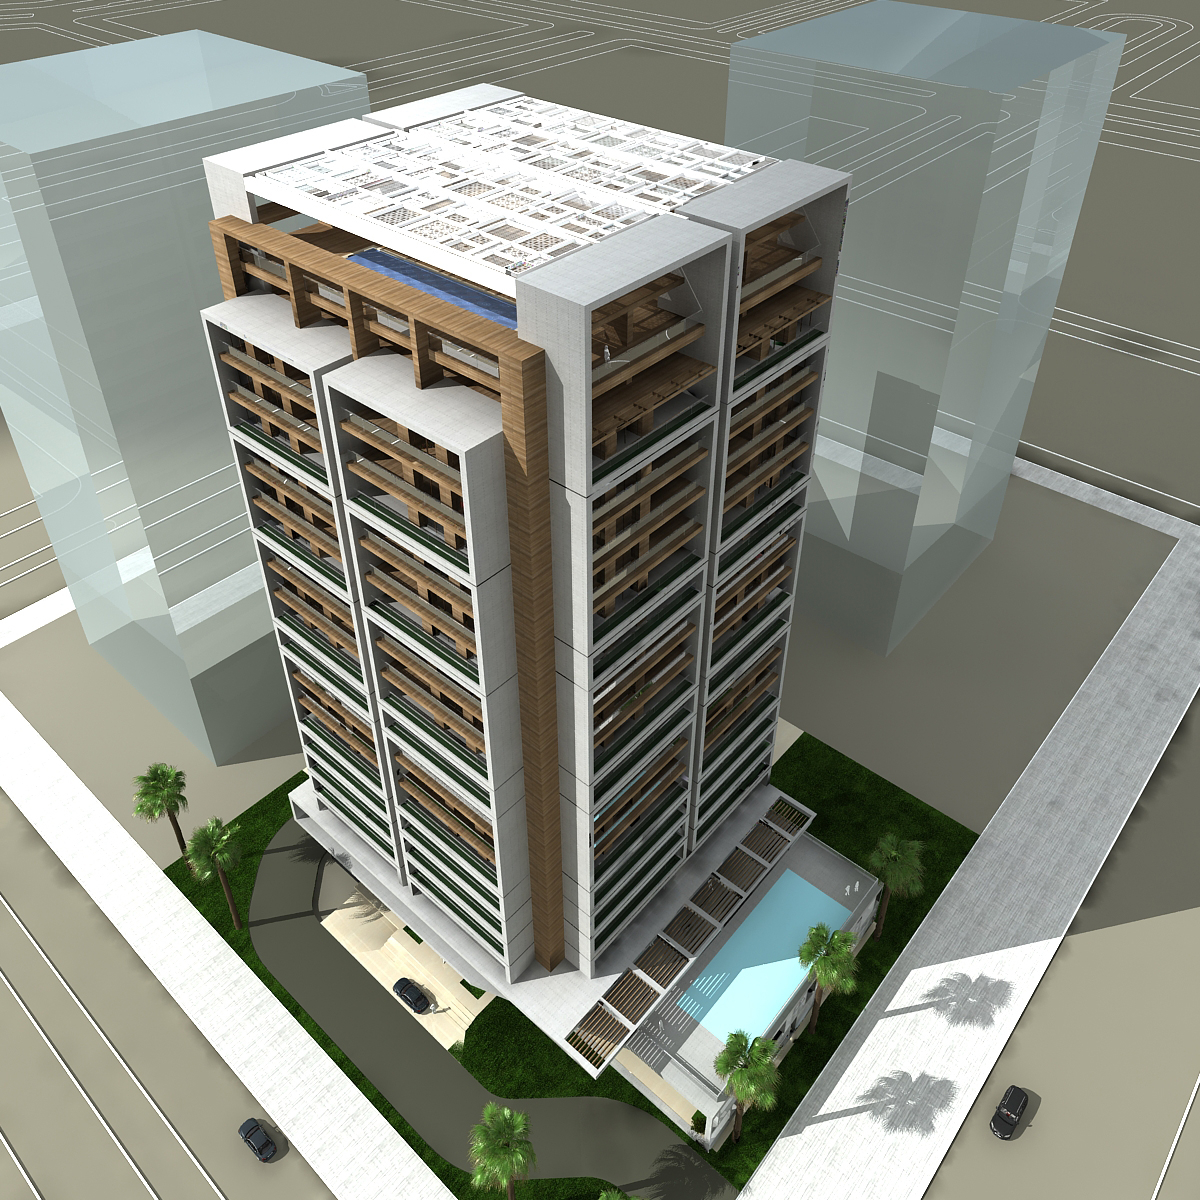 RESIDENTIAL TOWER 014